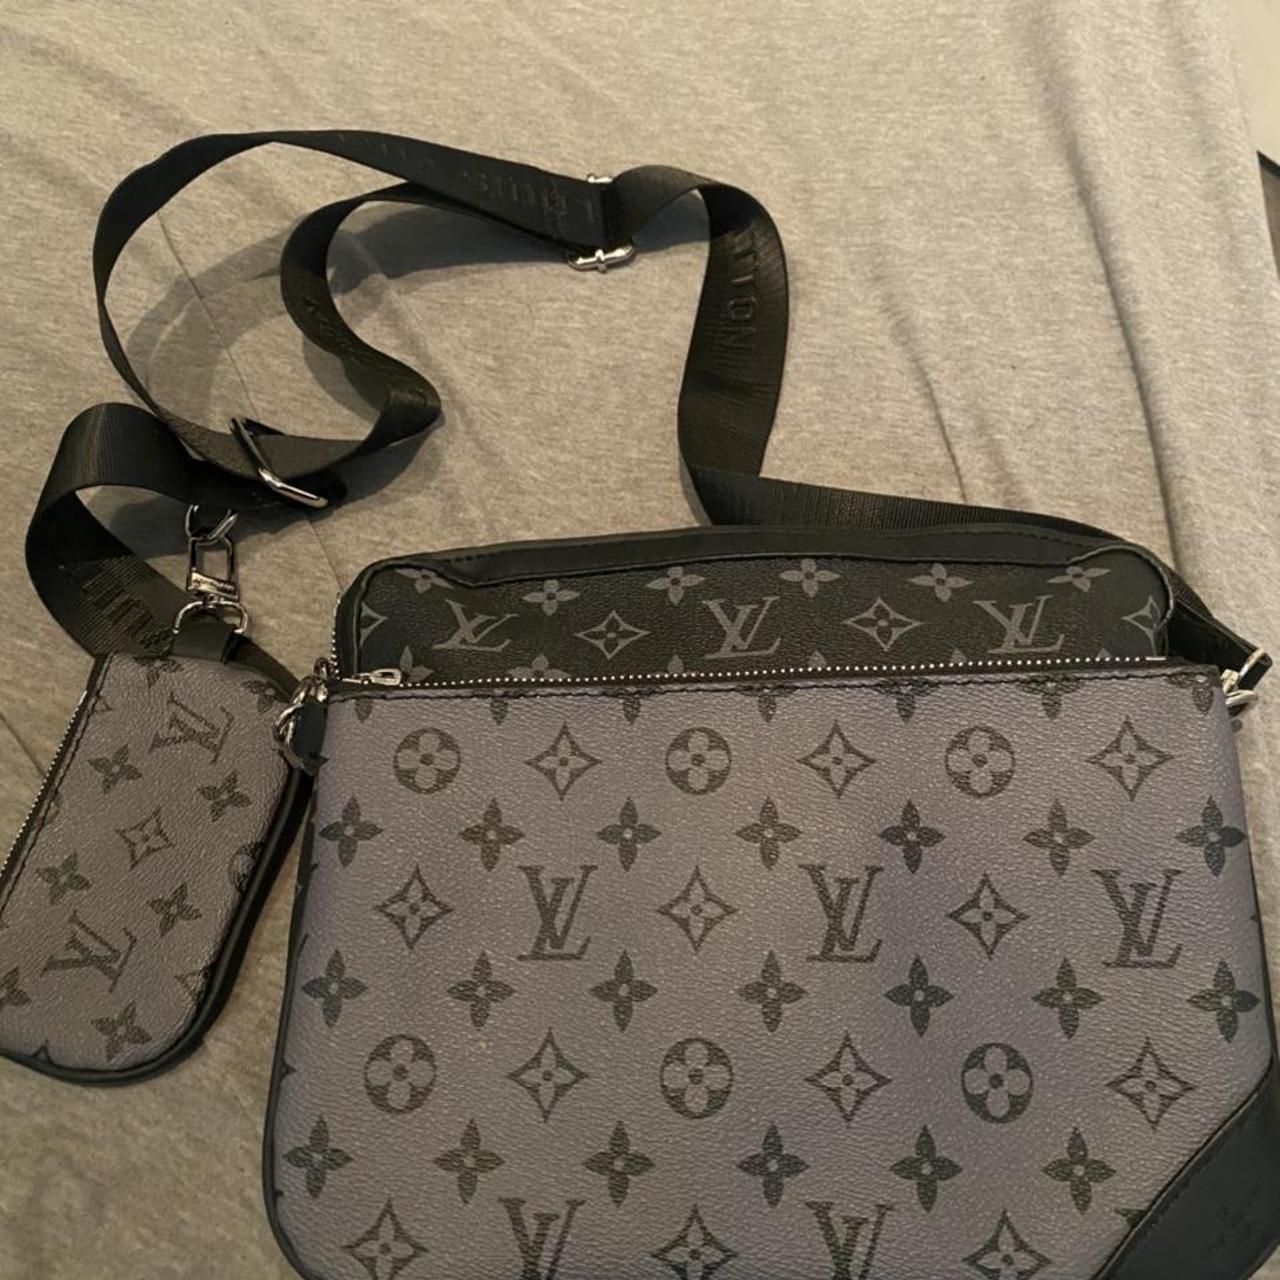 Lv trio messanger bag used for one night very... - Depop